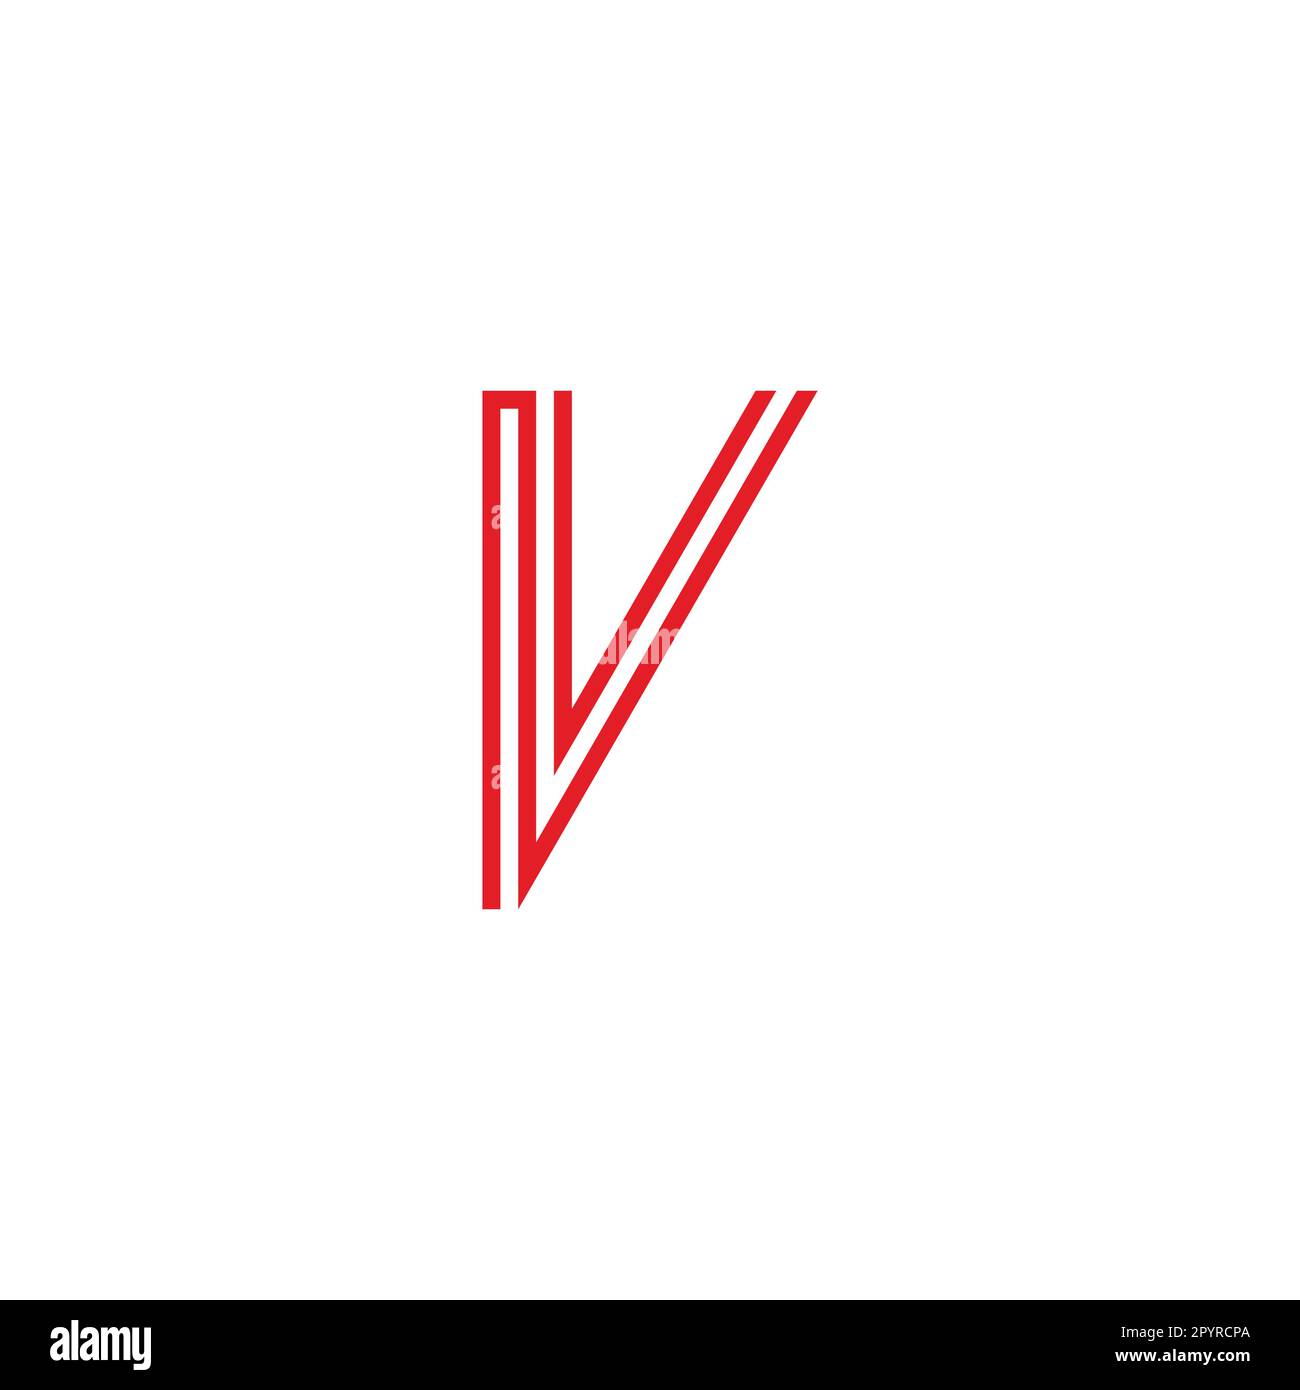 Letter N and v lines geometric symbol simple logo vector Stock Vector